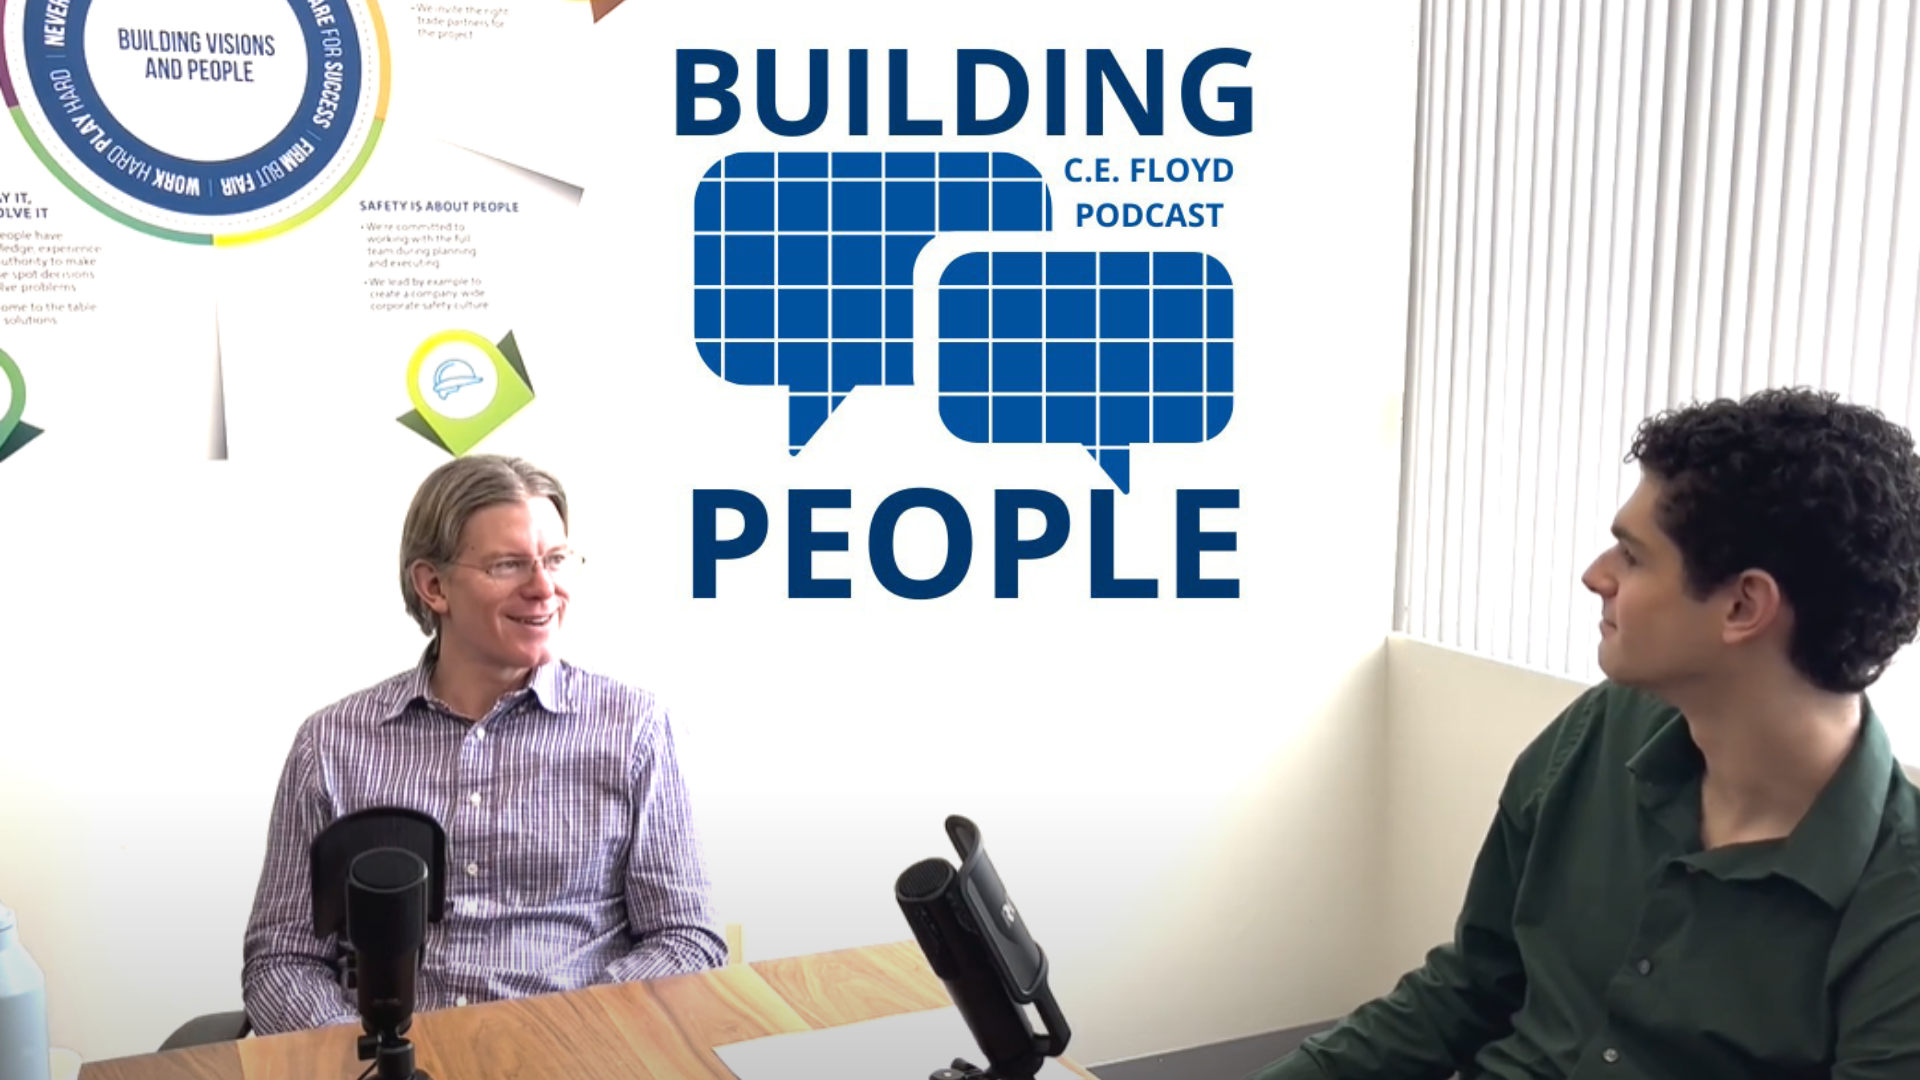 Moving Forward with Purpose featuring Chris Floyd - Building People: C.E Floyd Podcast Episode 1